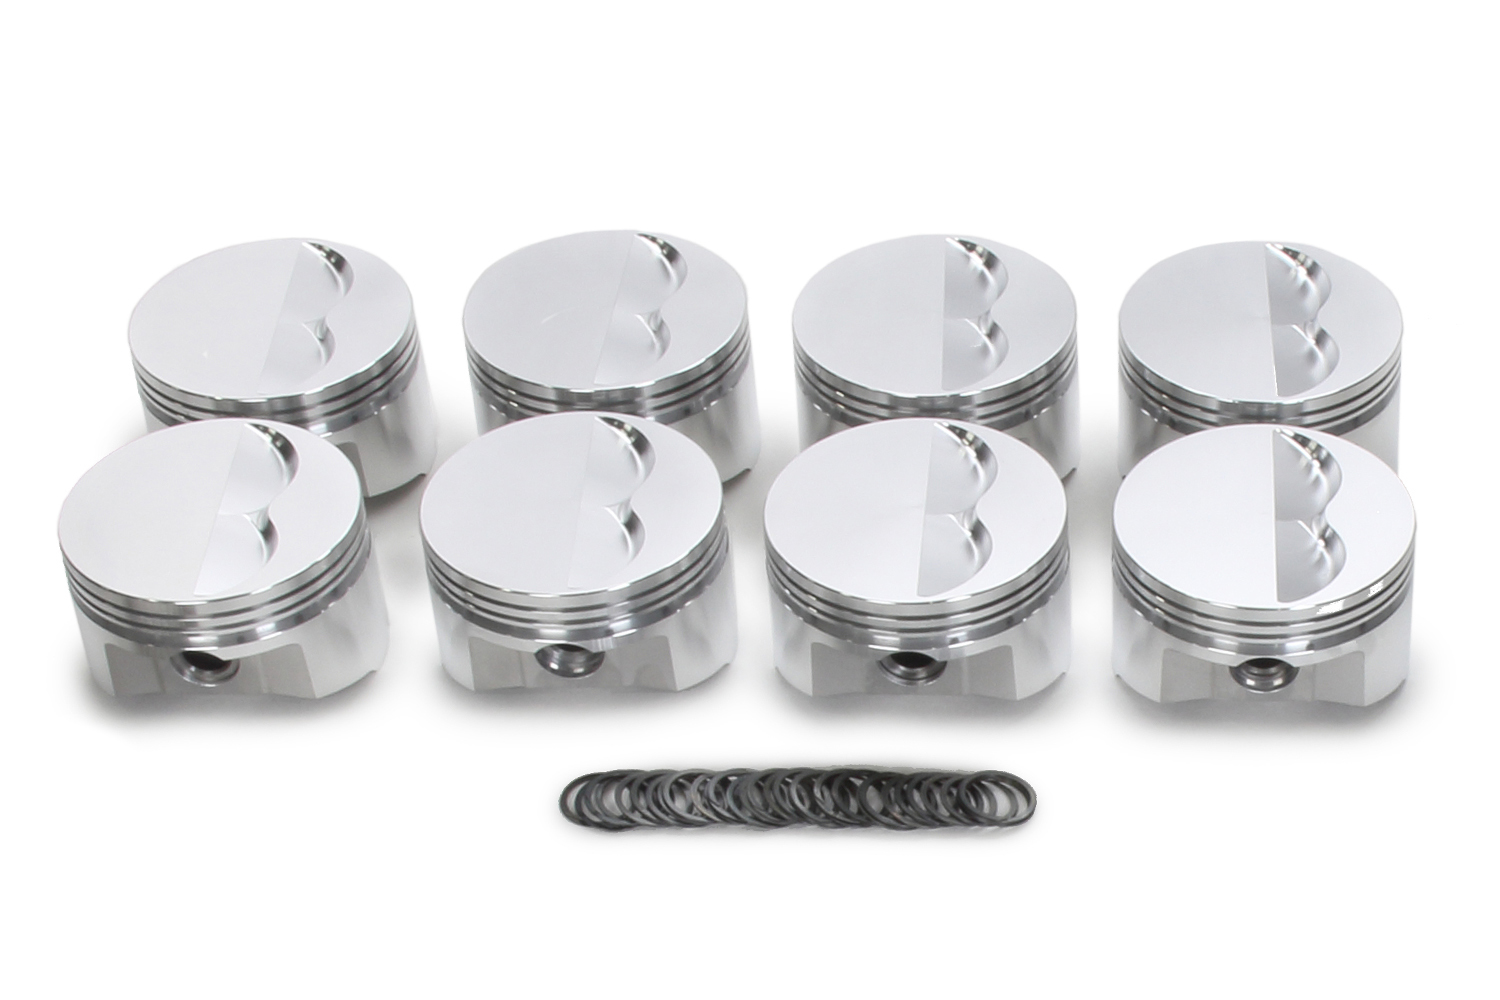 SRP Pistons 138082 Piston, 350 Flat Top, Forged, 4.040 in Bore, 1/16 x 1/16 x 3/16 in Ring Grooves, Minus 5.00 cc, Small Block Chevy, Set of 8